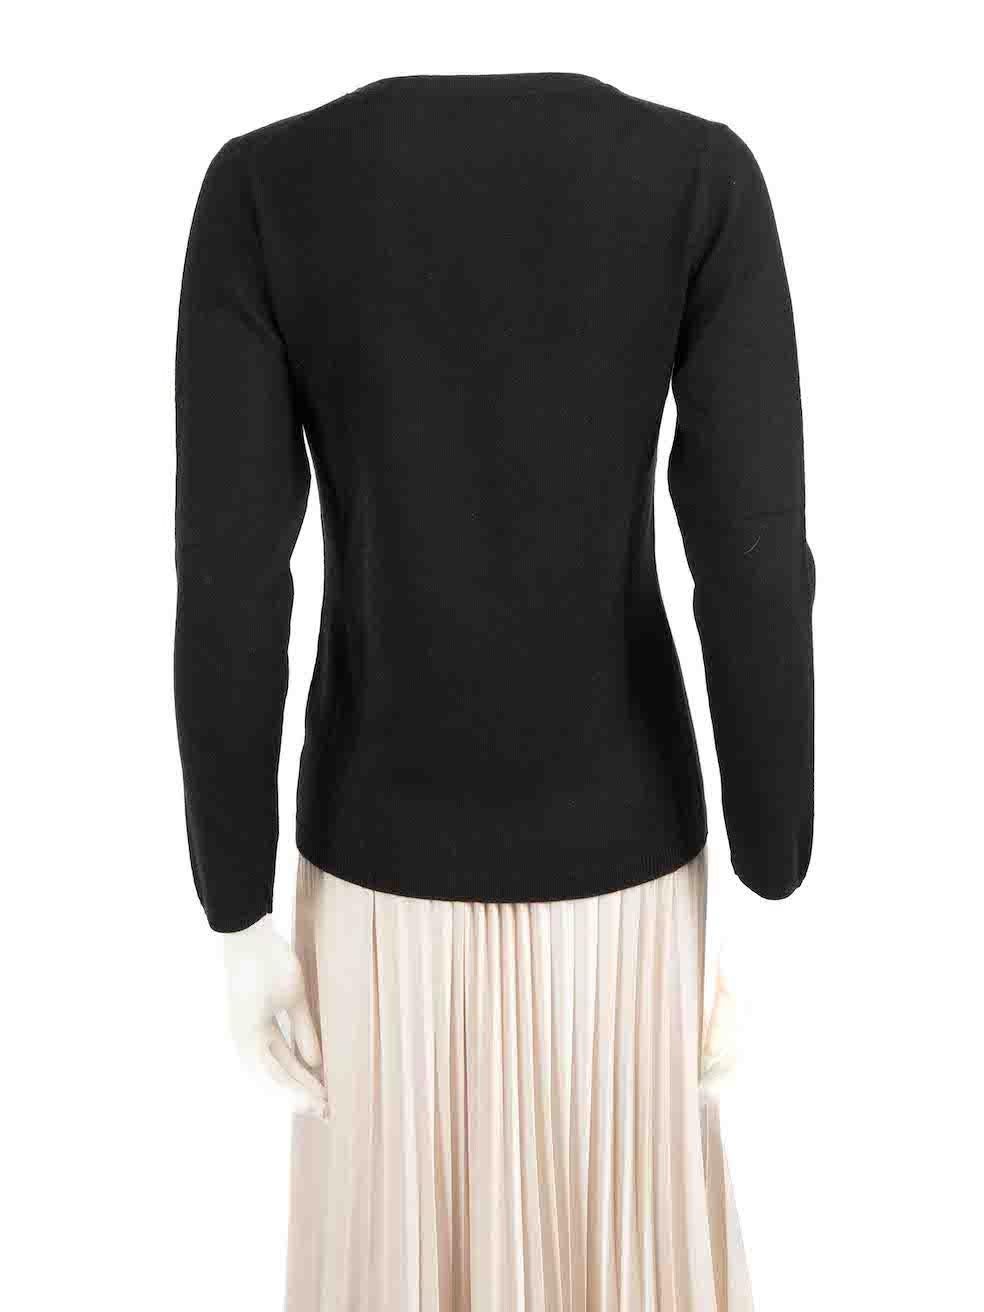 N. PEAL Black V-Neck Cashmere Knit Top Size S In Fair Condition For Sale In London, GB